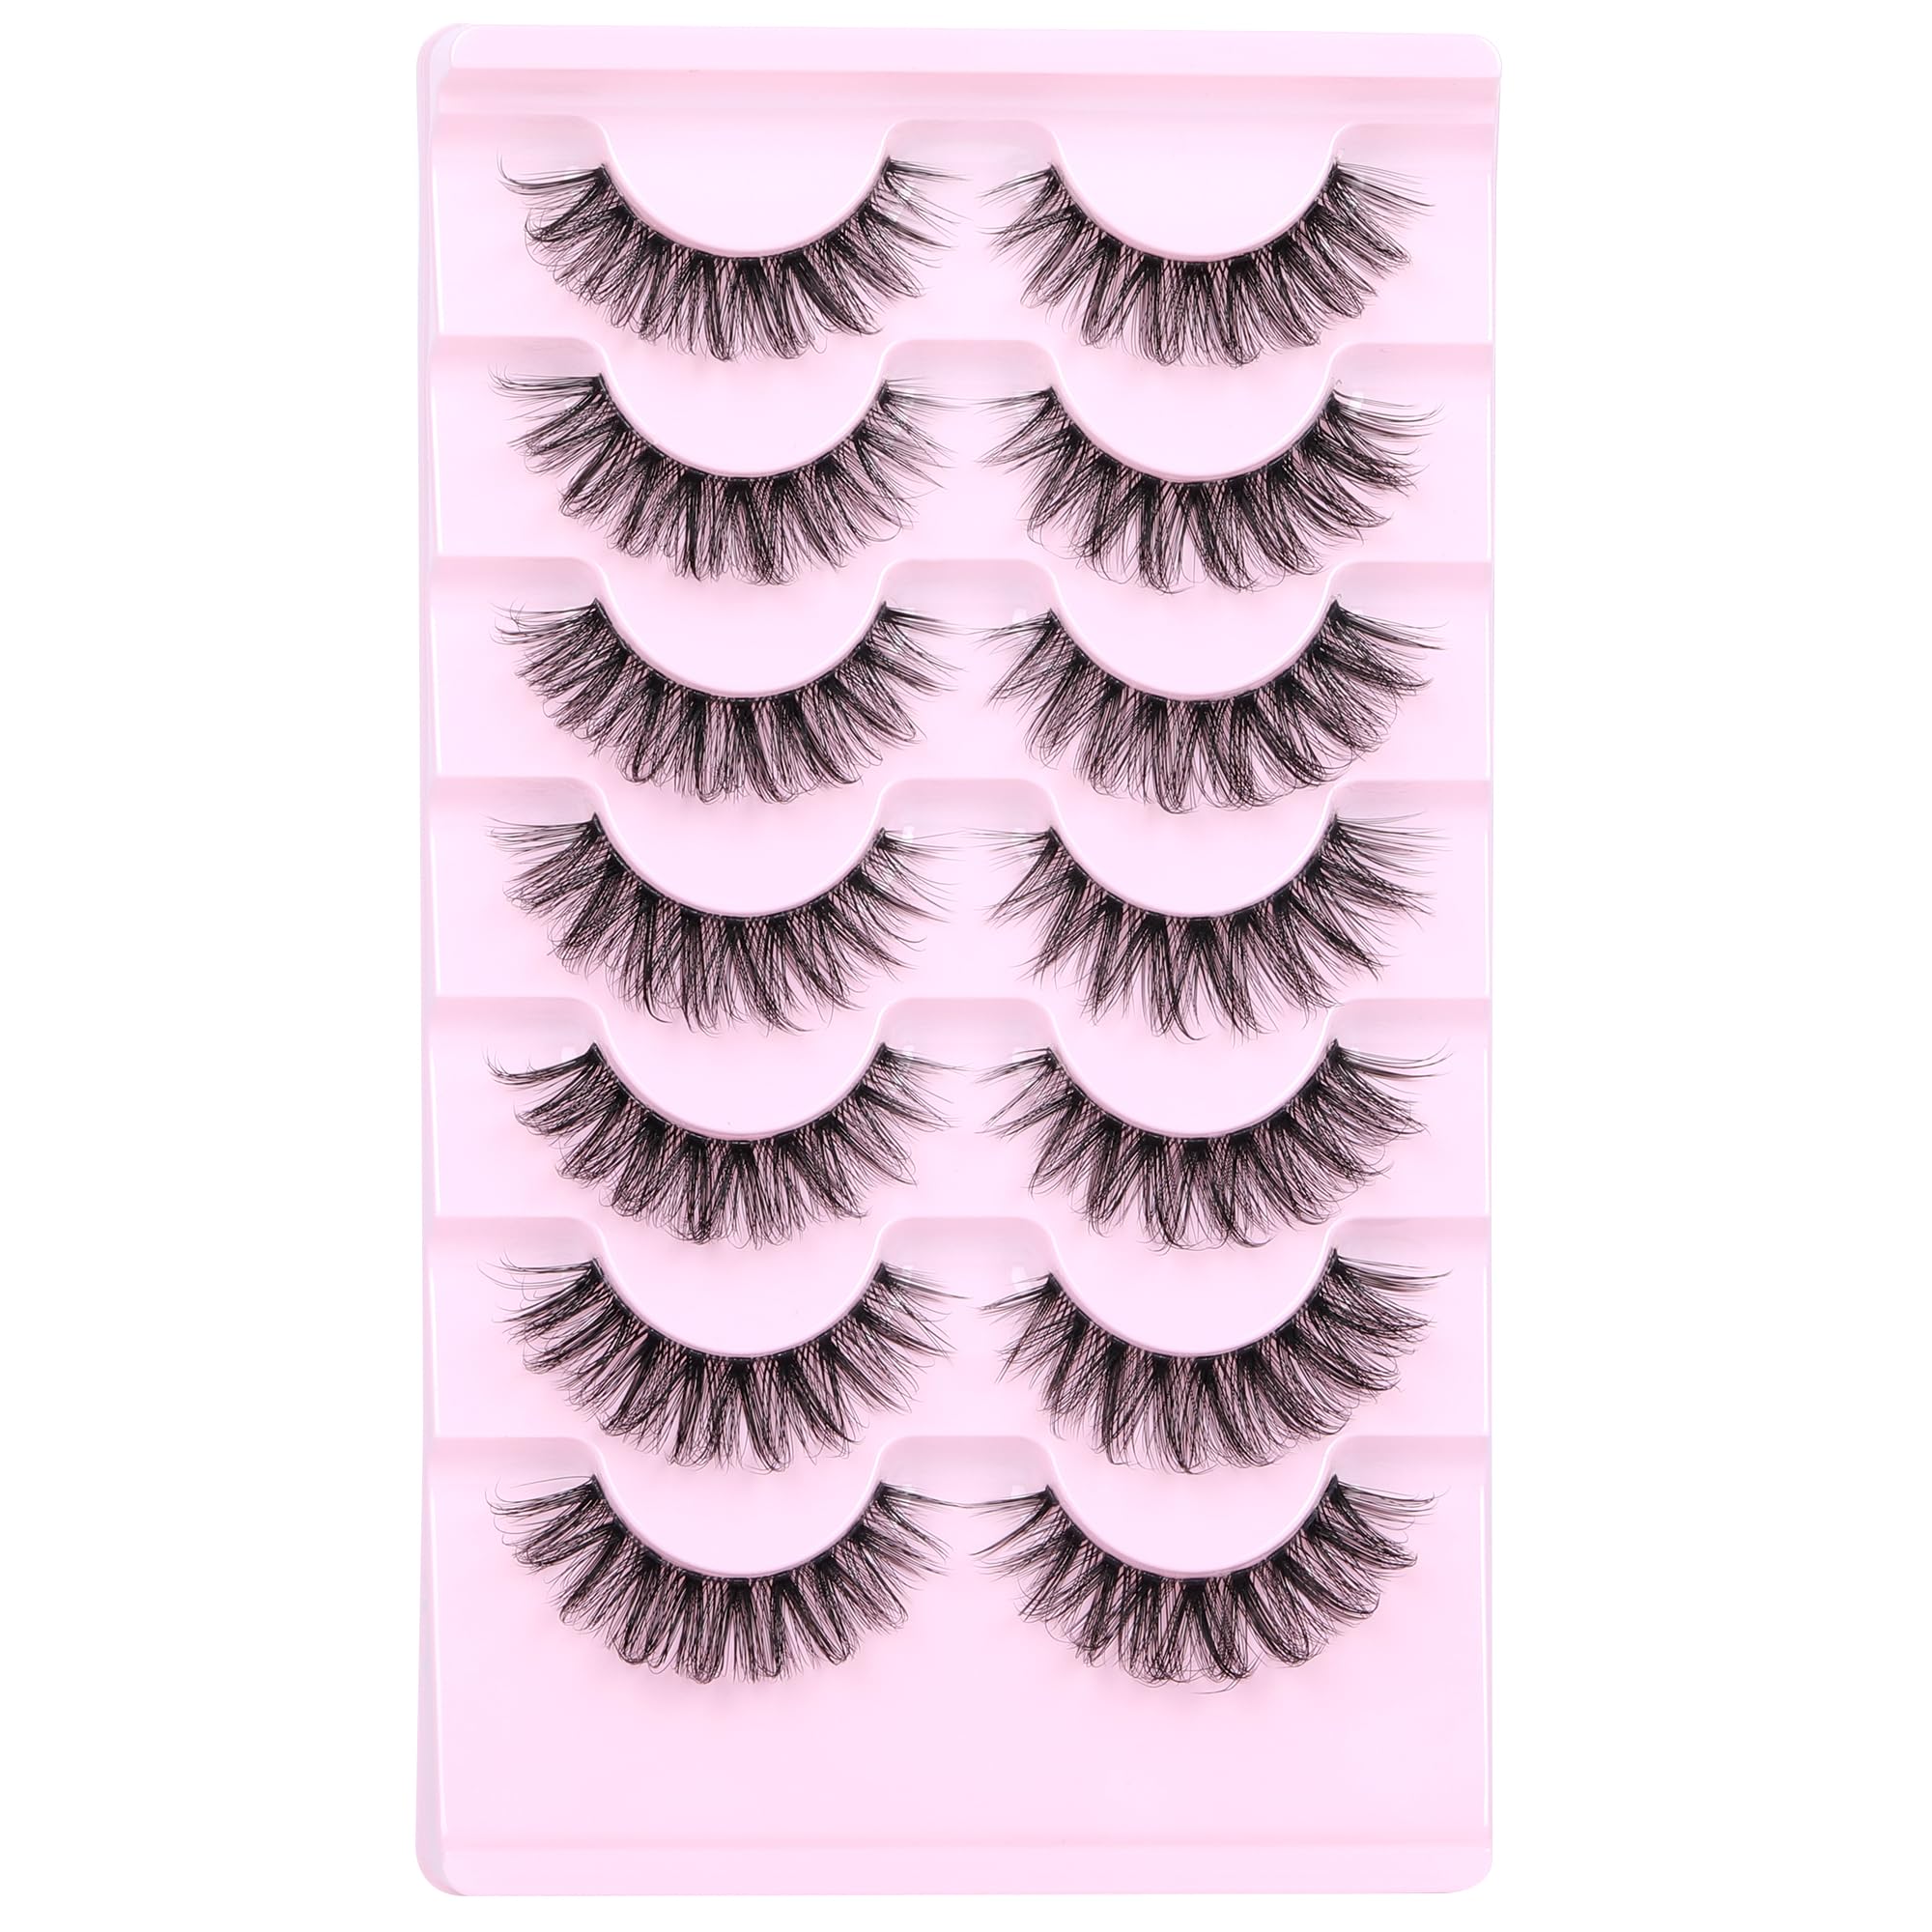 JIMIRE Natural False Eyelashes with Clear Band Mink Fluffy Lashes D Curl Strip Lashes 16MM Volume Natural Look like Lash Extension 5D Cat Eye Lashes 7 Pairs Pack